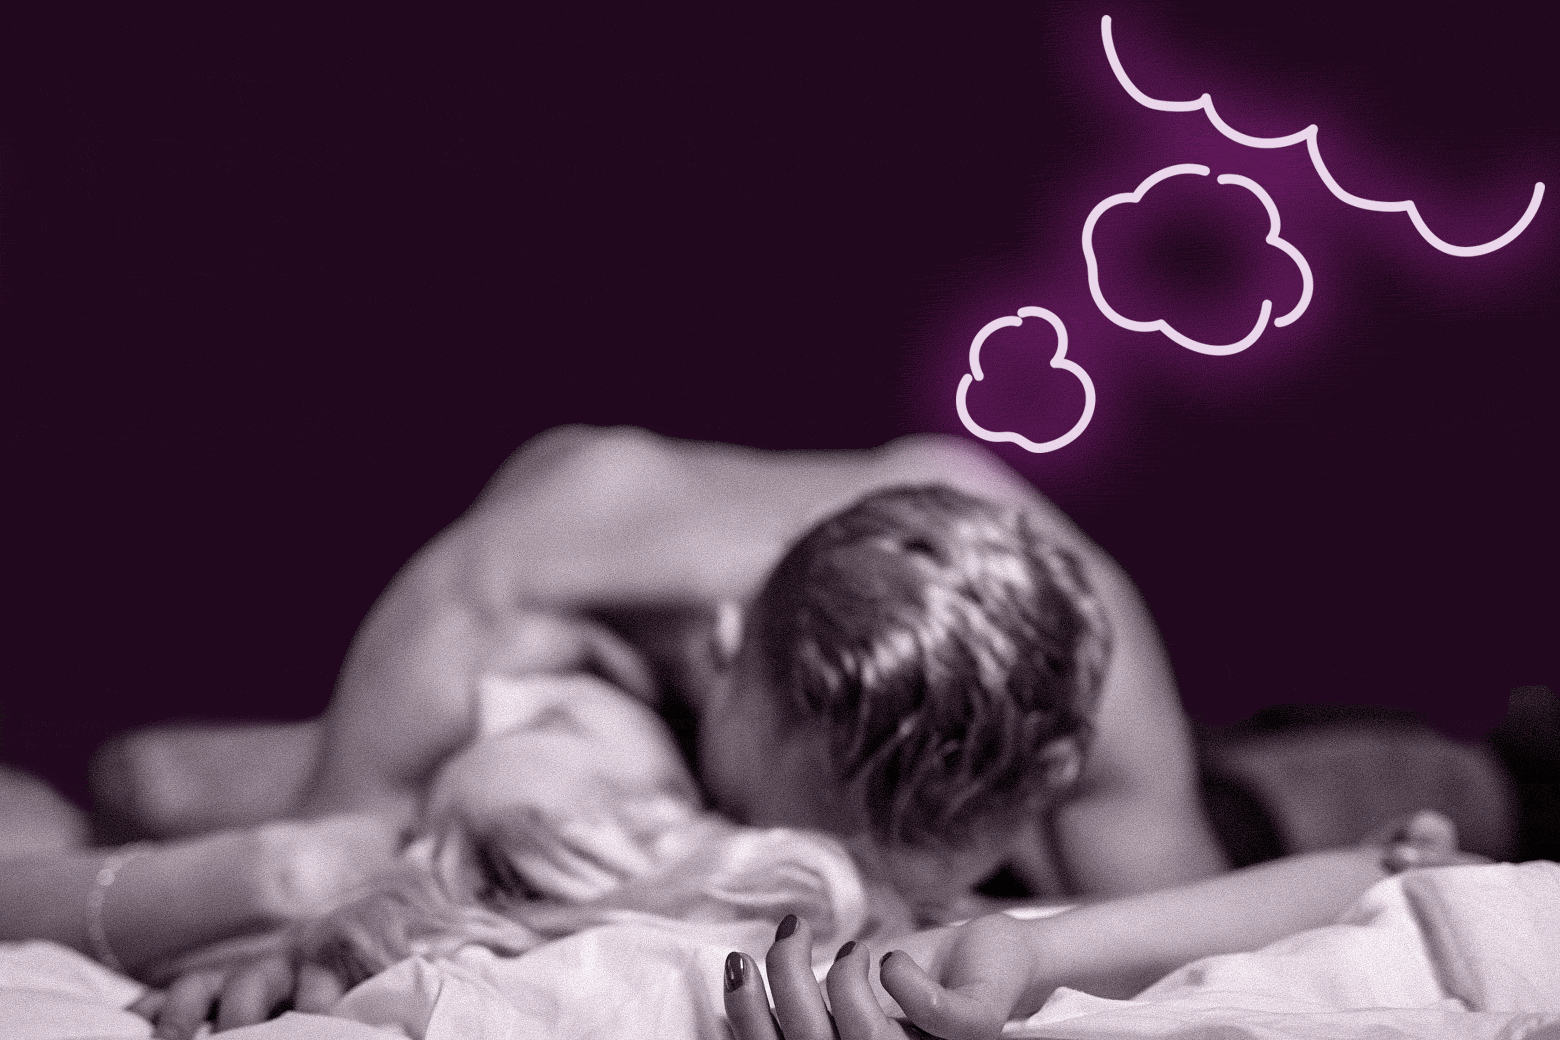 Man kissing a woman with a thought cloud over him.